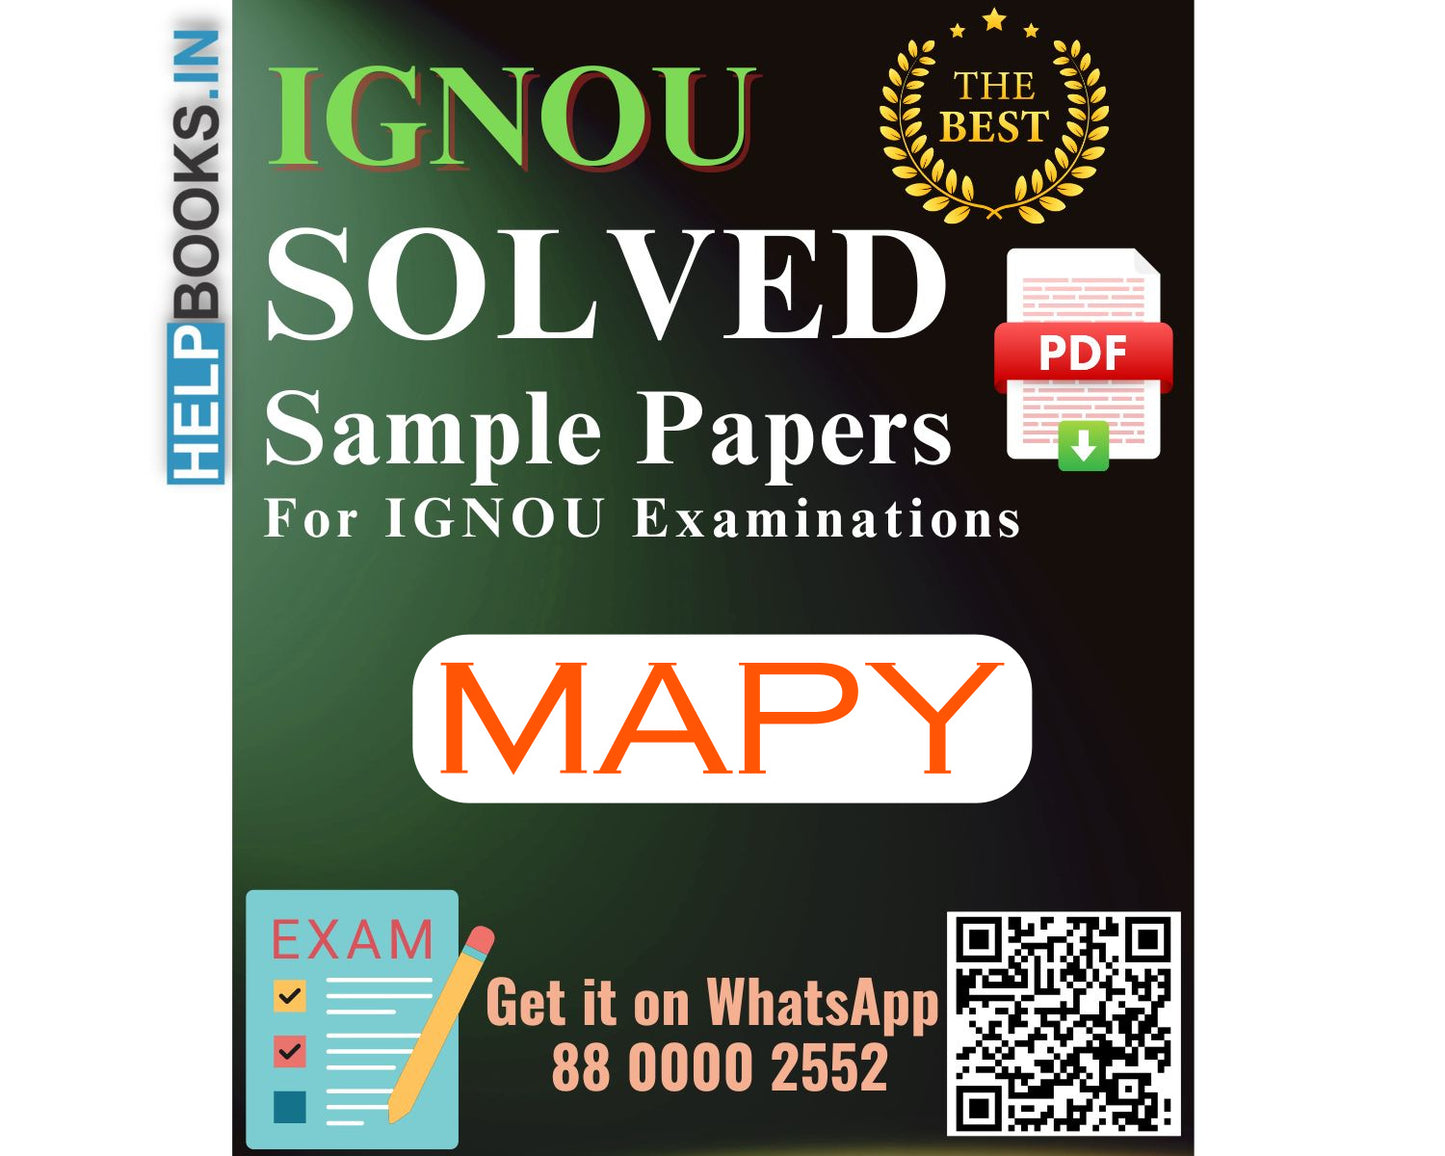 IGNOU Master of Arts (Philosophy) (MAPY) | Solved Sample Papers for Exams